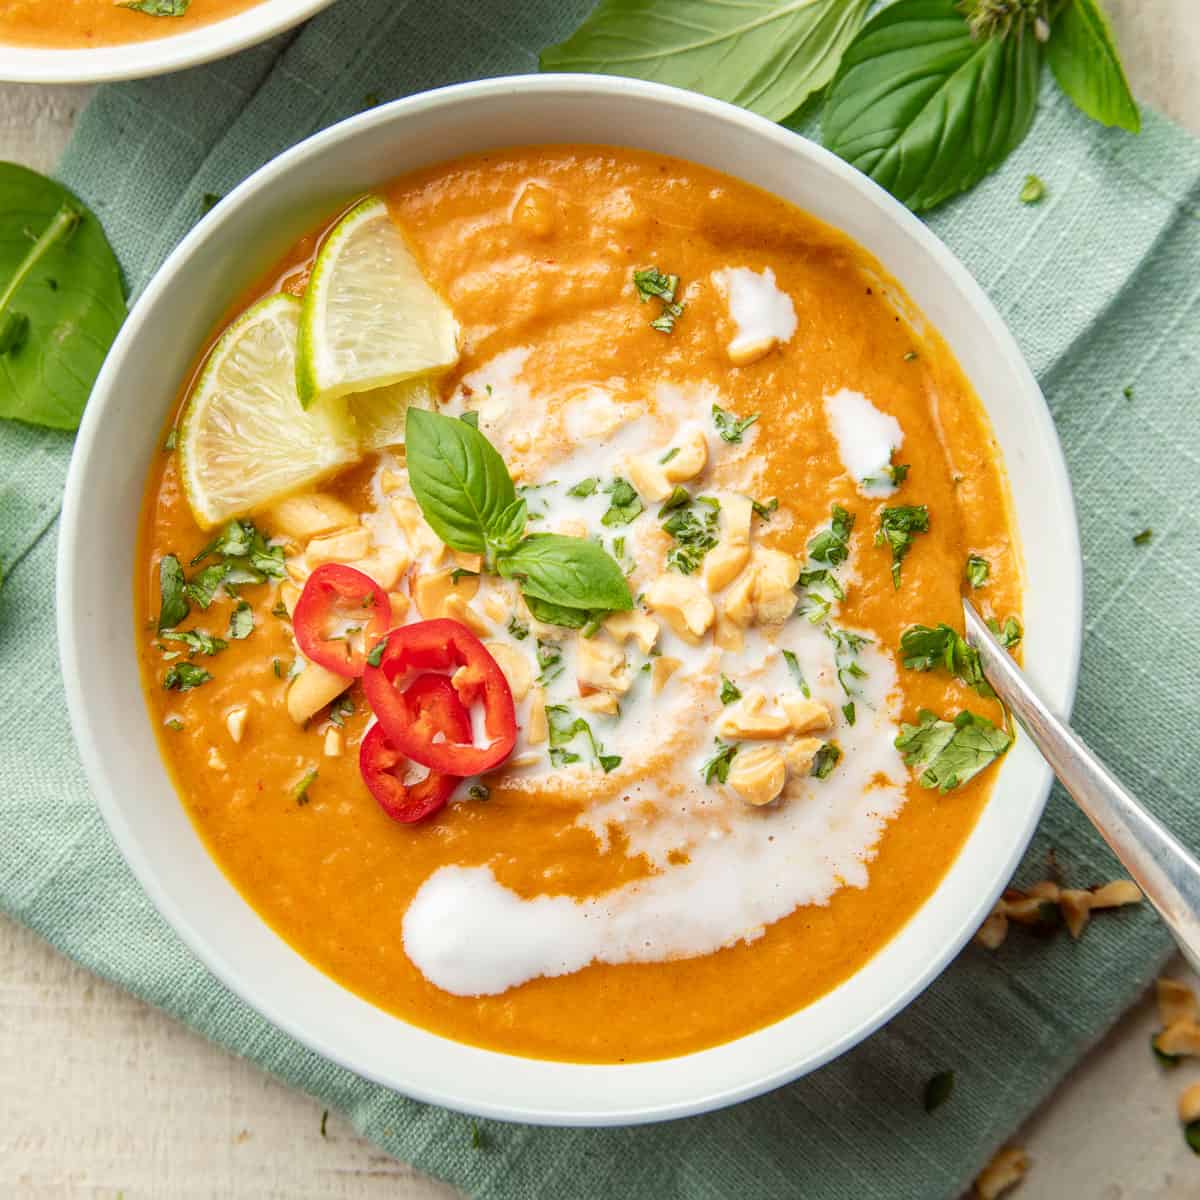 Bowl of Thai Pumpkin Soup topped with coconut milk, peanuts, and herbs.